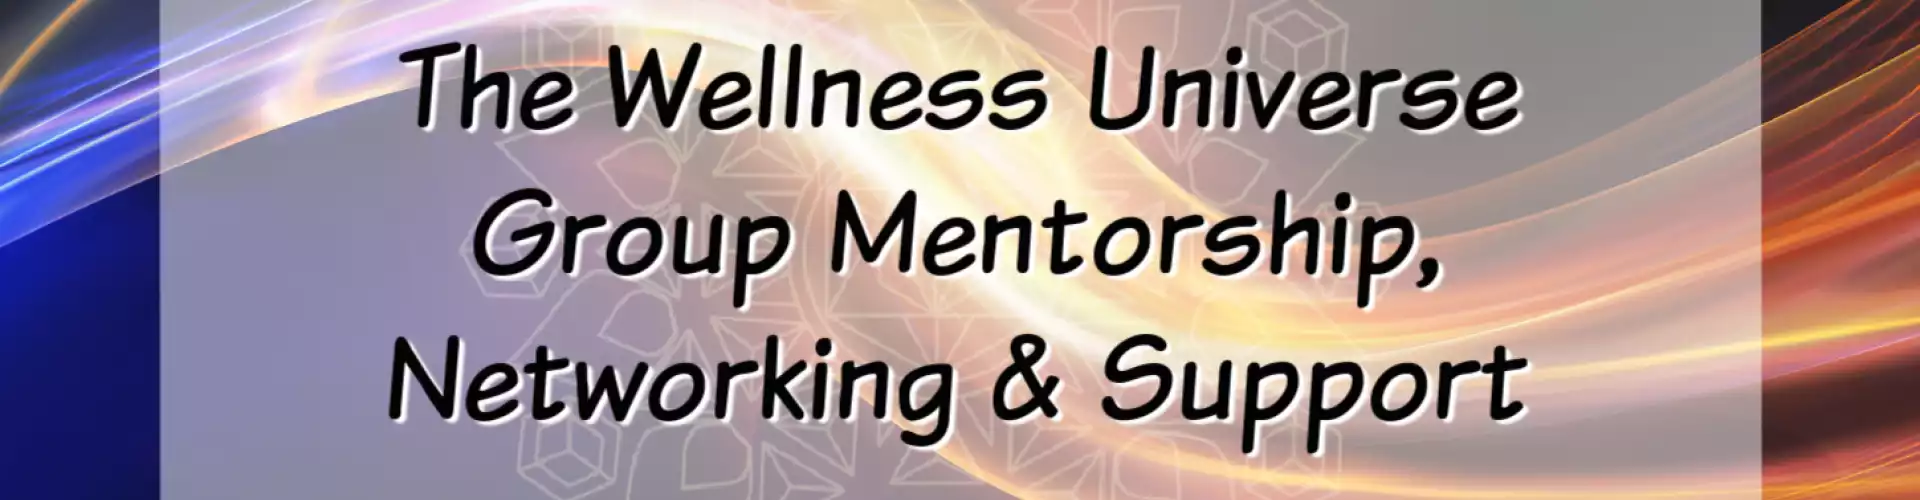 The Wellness Universe Mentorship, Networking & Support January 2021